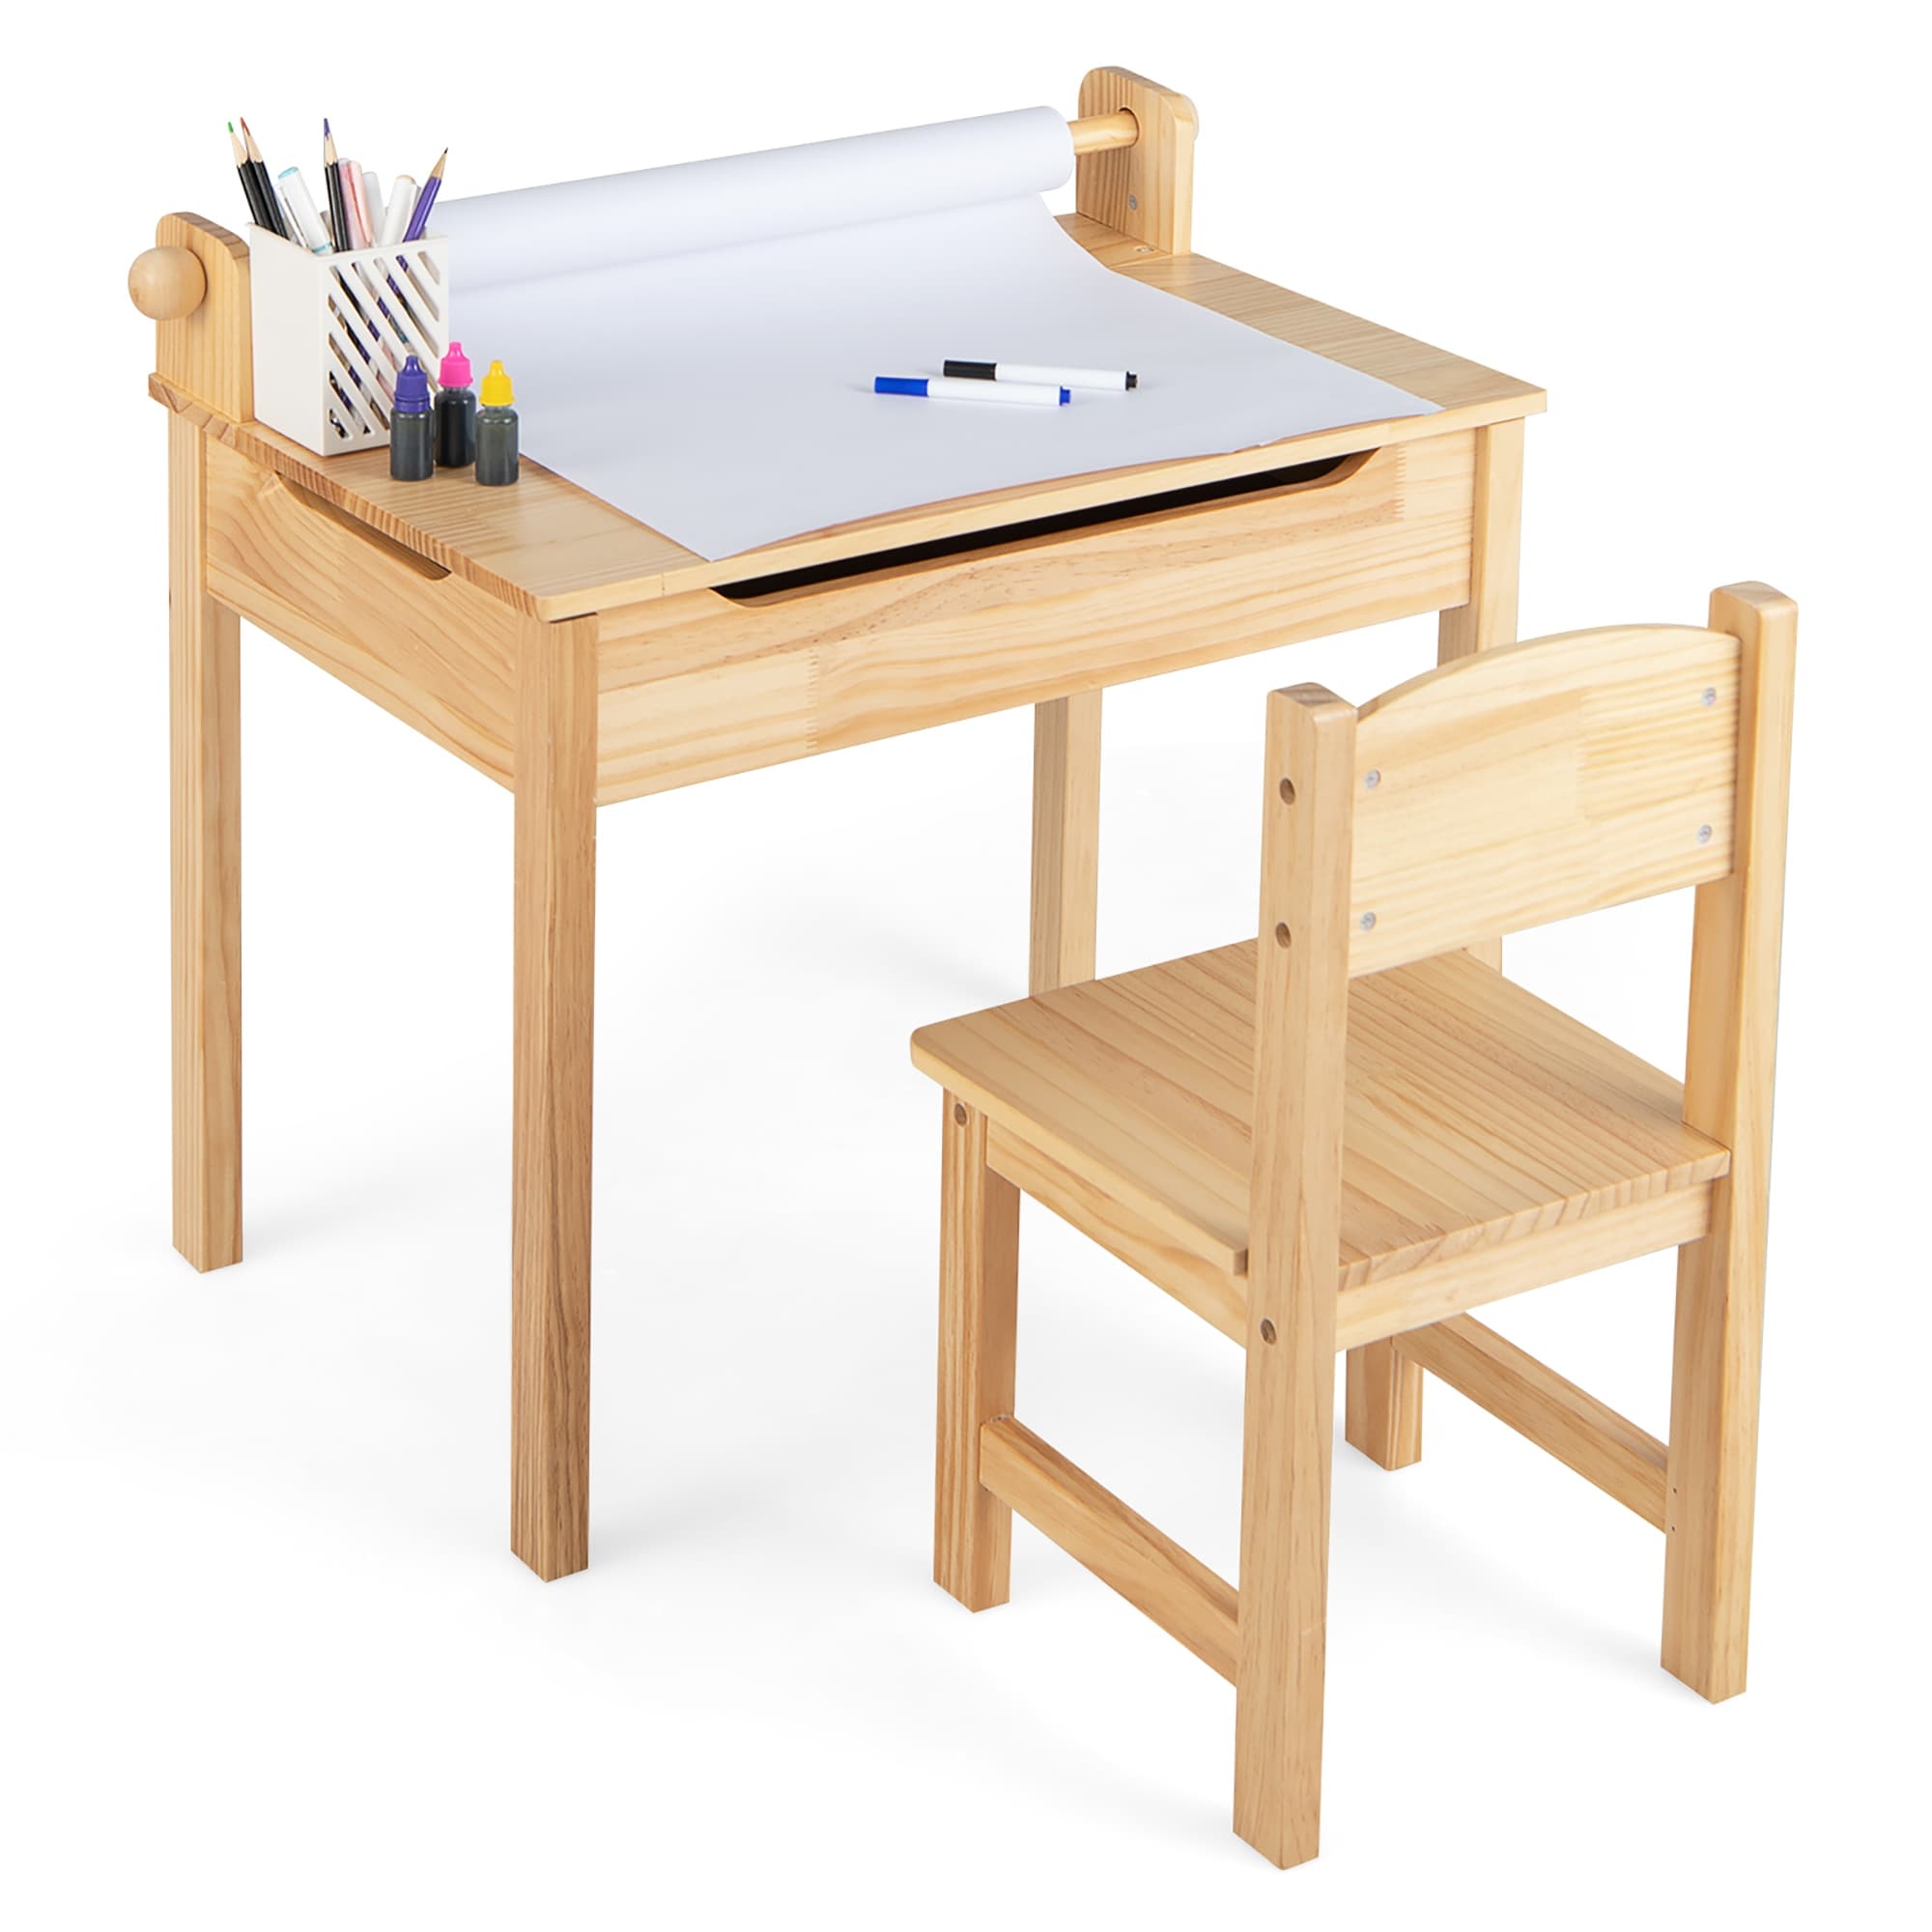 https://ak1.ostkcdn.com/images/products/is/images/direct/2232d0e0e3b8b45ed12ac040bffa877a97cccc6e/Costway-Toddler-Multi-Activity-Table-withChair-Kids-Art-%26-Crafts-Table.jpg